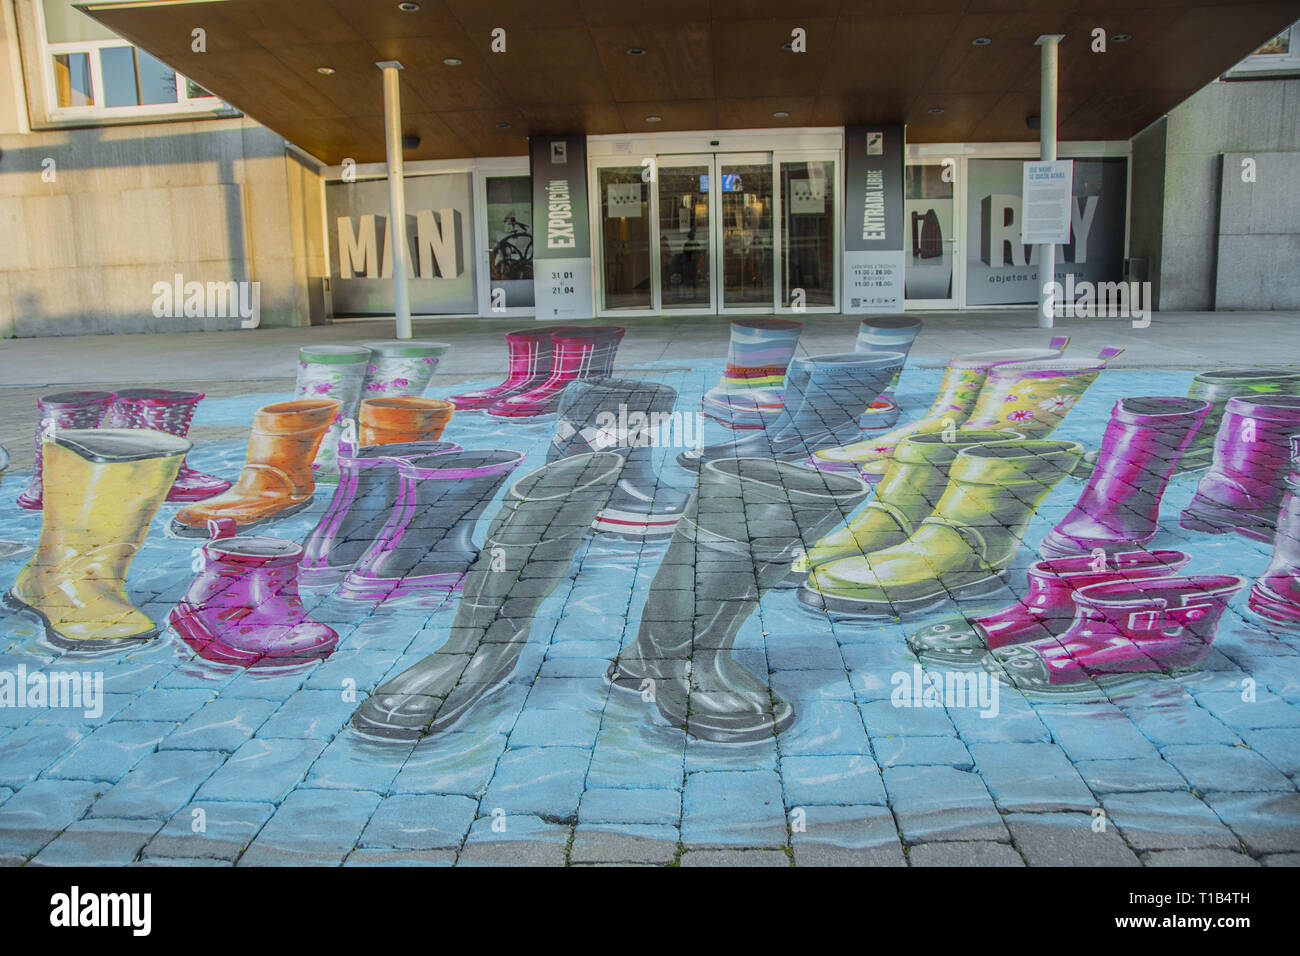 March 25, 2019 - Madrid, Madrid, Spain - International day of water intervention 3d paint art by the artist Leon Keer seen in front of the door of FundaciÃ³n canal in the north of Madrid City..The urban artist Leon Keer from the Netherlands, one of the most outstanding in the international field, has made an ephemeral intervention with his 3D anamorphic graffiti painting. His work makes reference to the different audiences that benefit from the activities of the Foundation, highlighting its variety, but also making them one by being all together. This intervention may be contemplated for sever Stock Photo